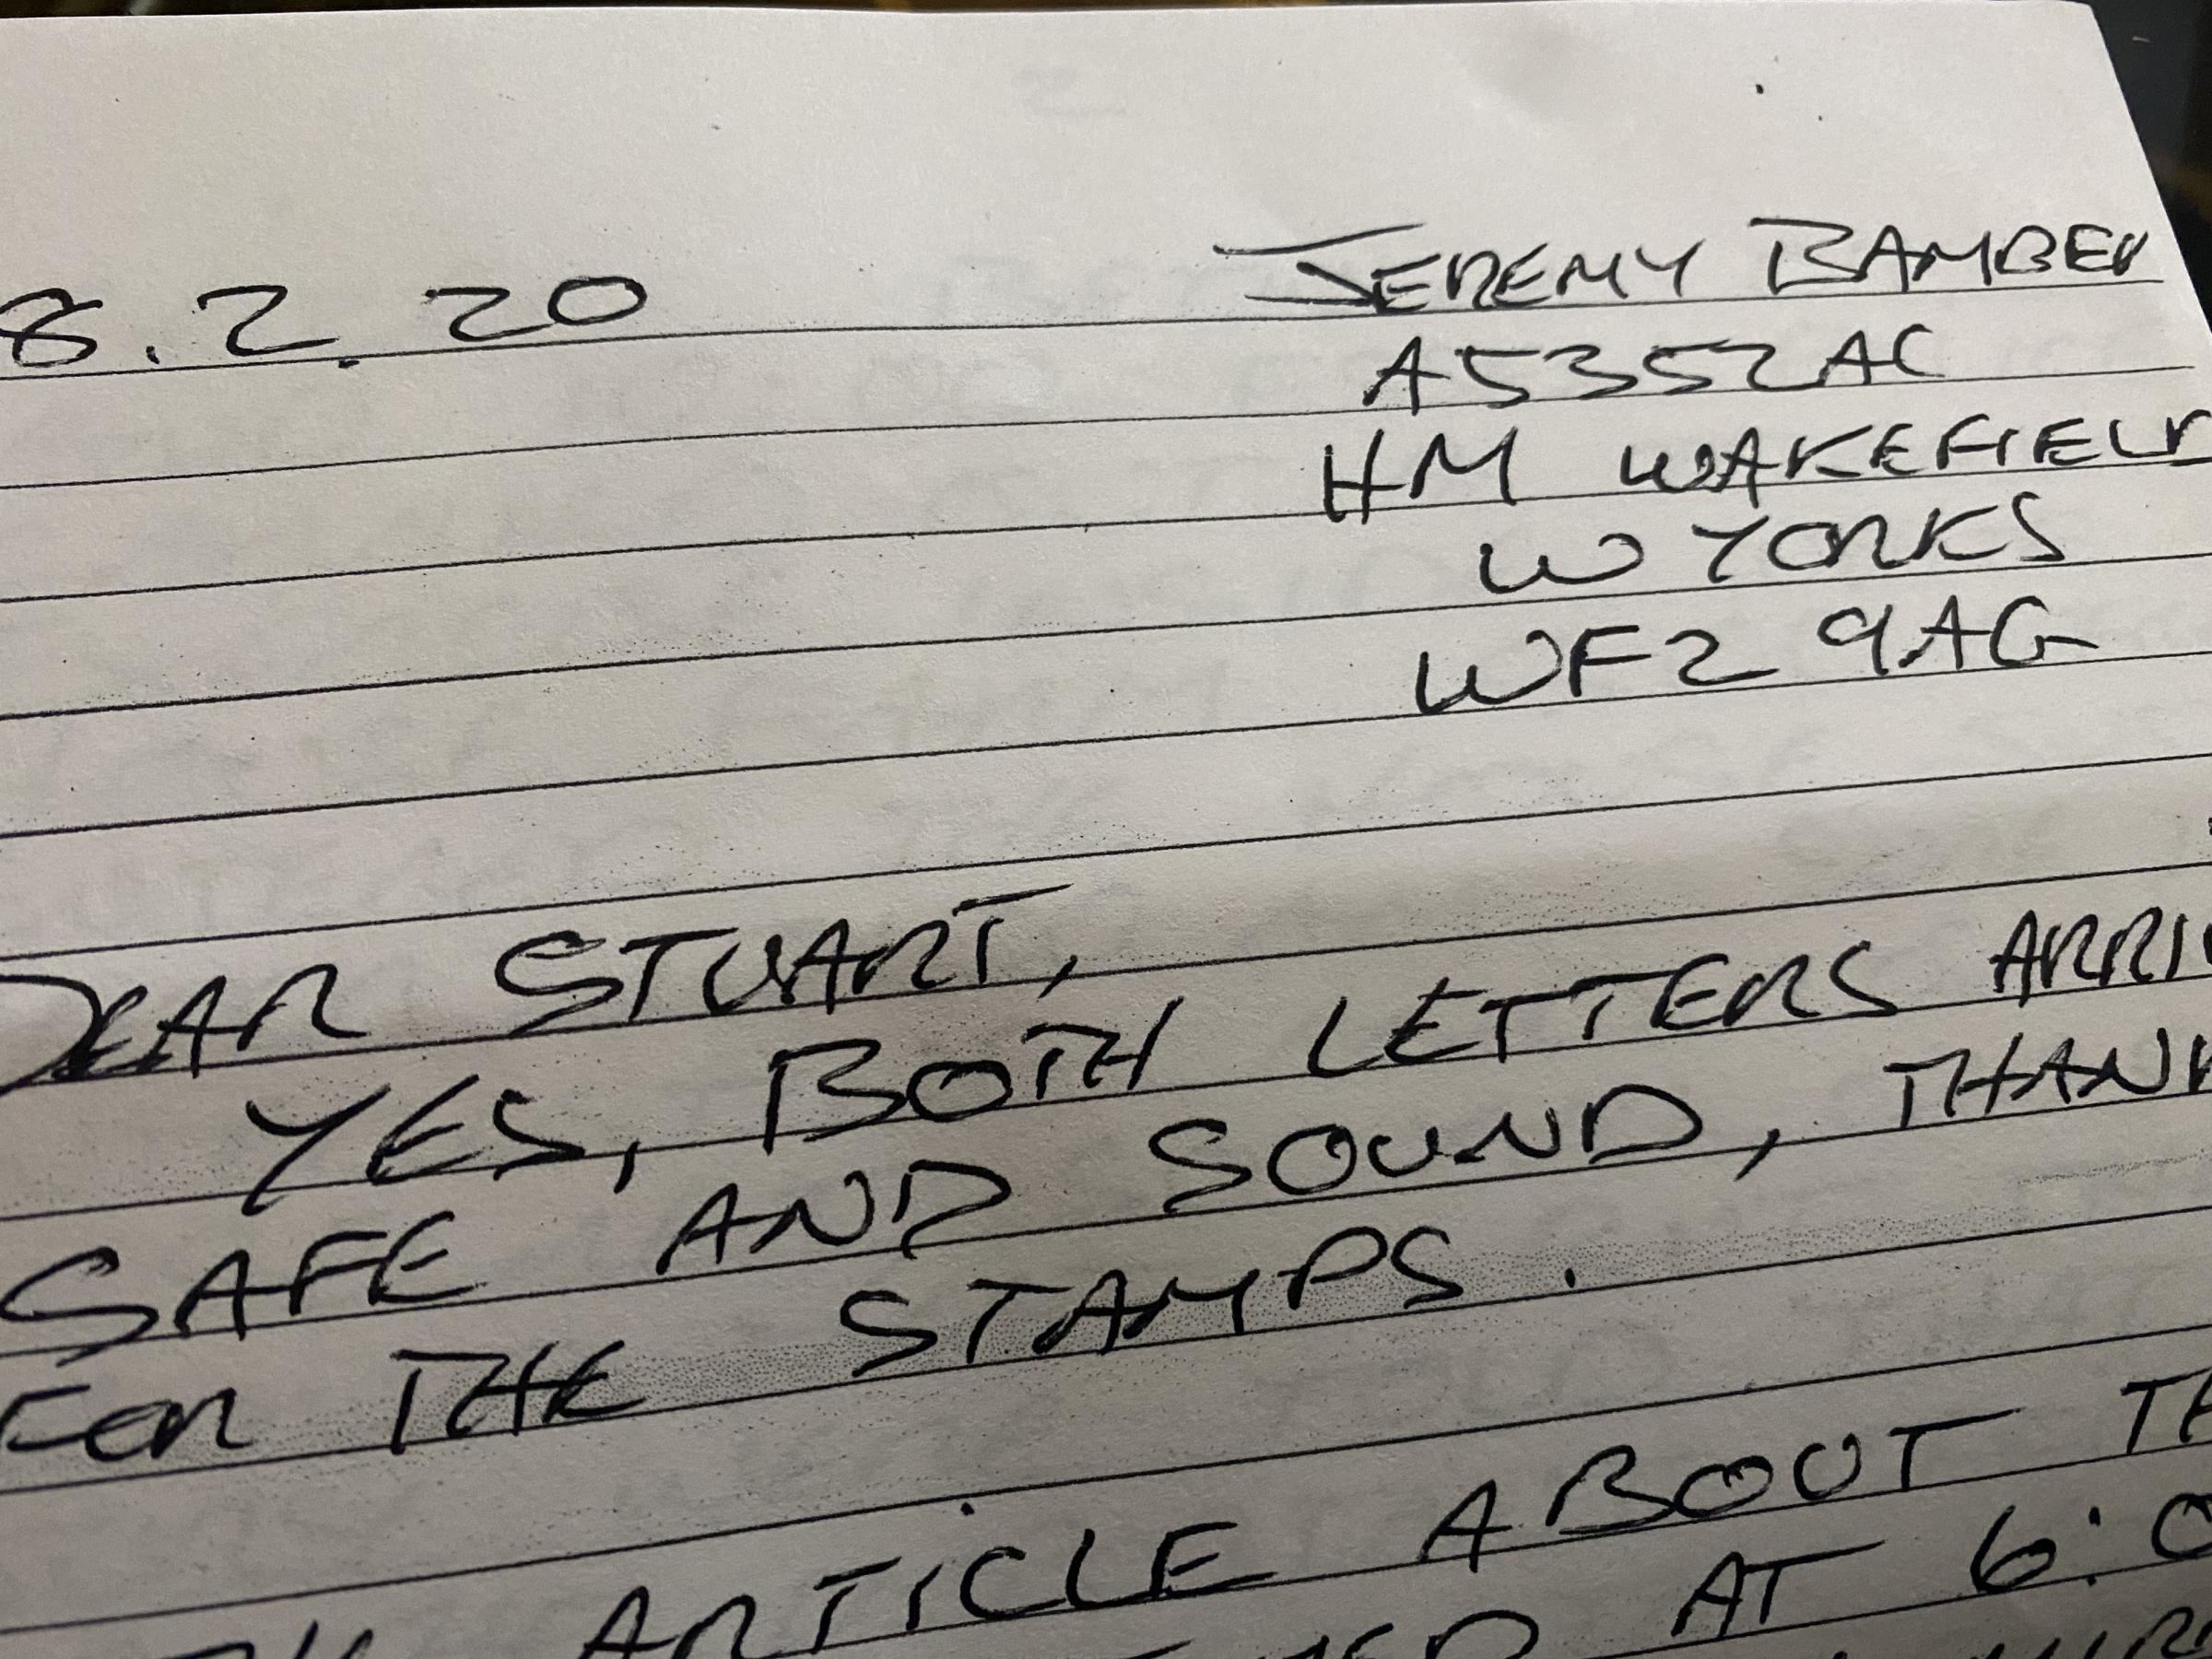 Stuart Bower has been writing letters to Bamber since 2007